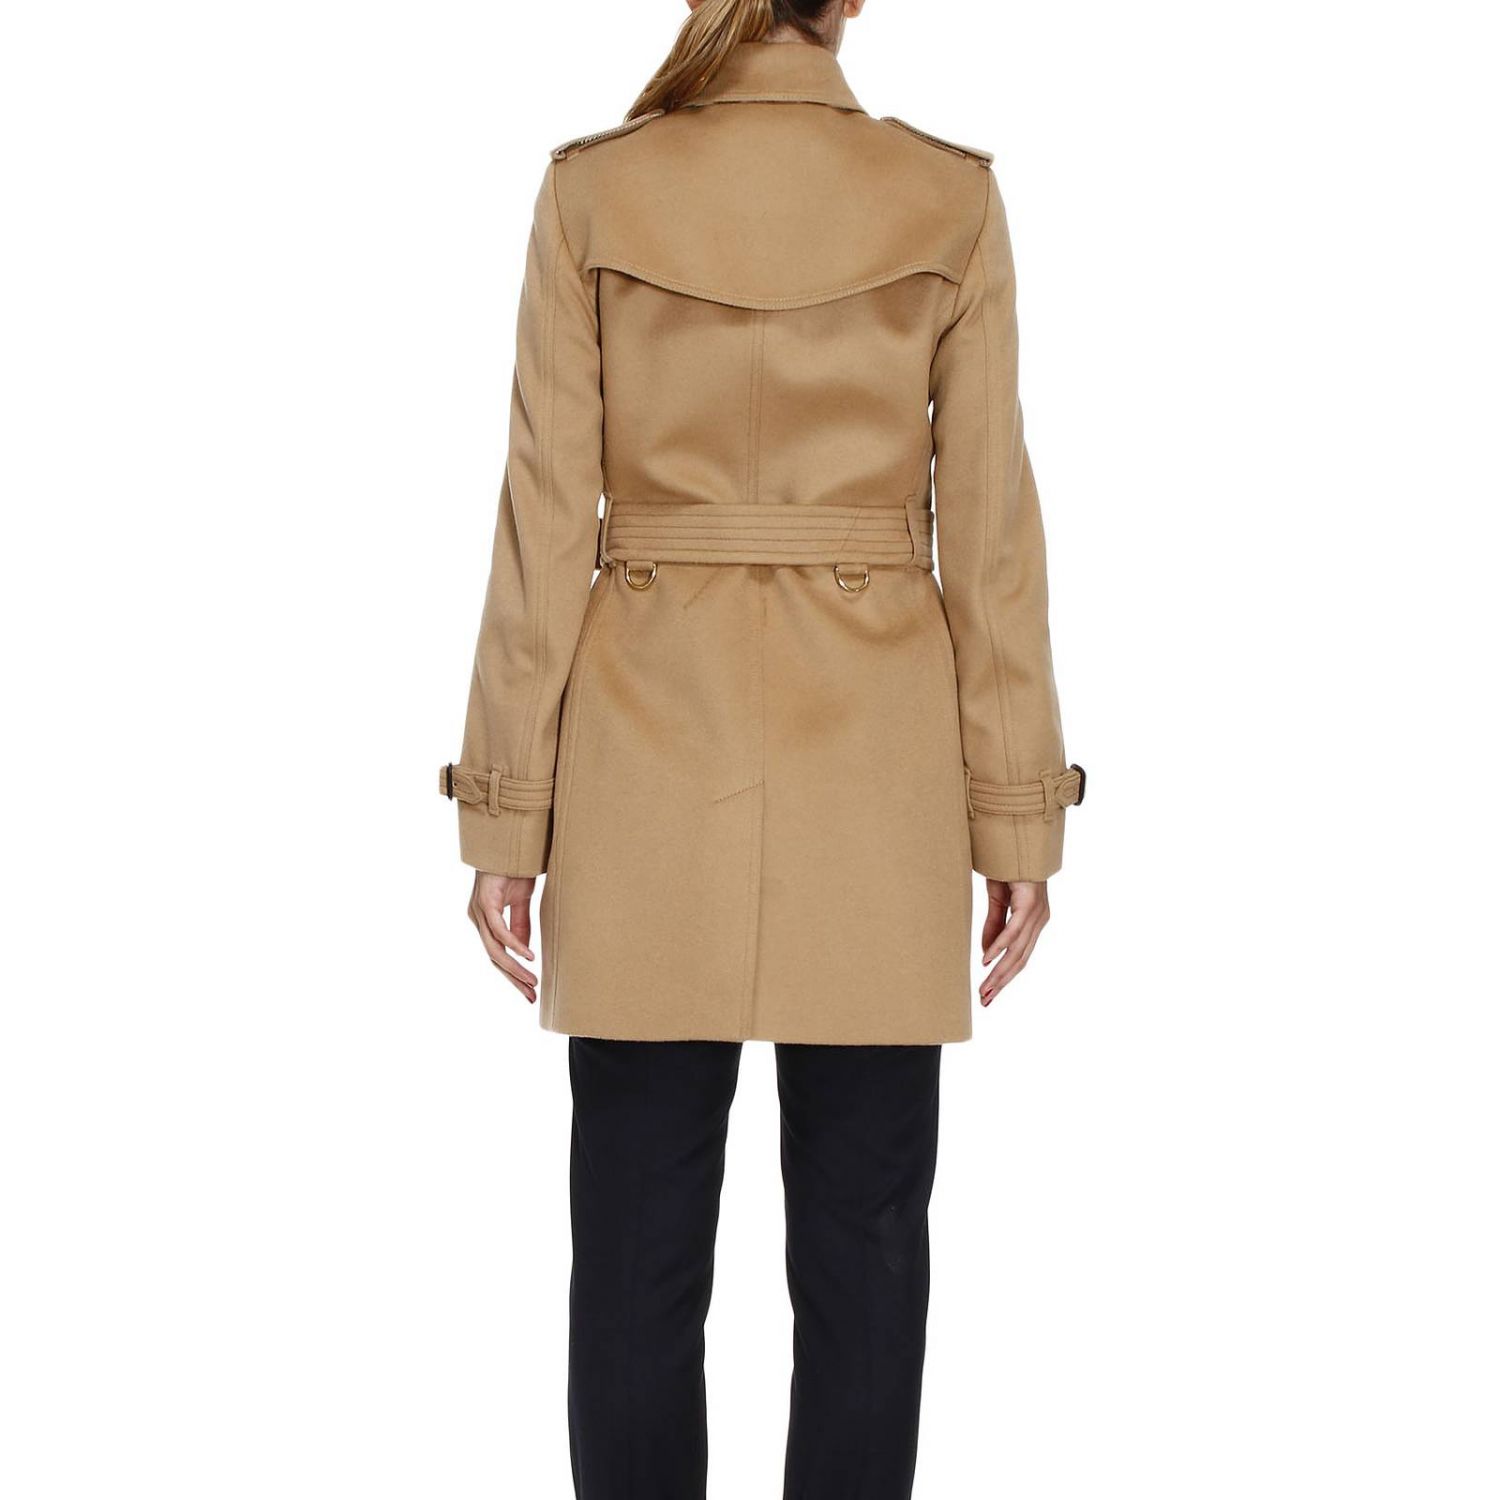 Burberry Outlet: Coat woman - Camel | Trench Coat Burberry 4019202 ...